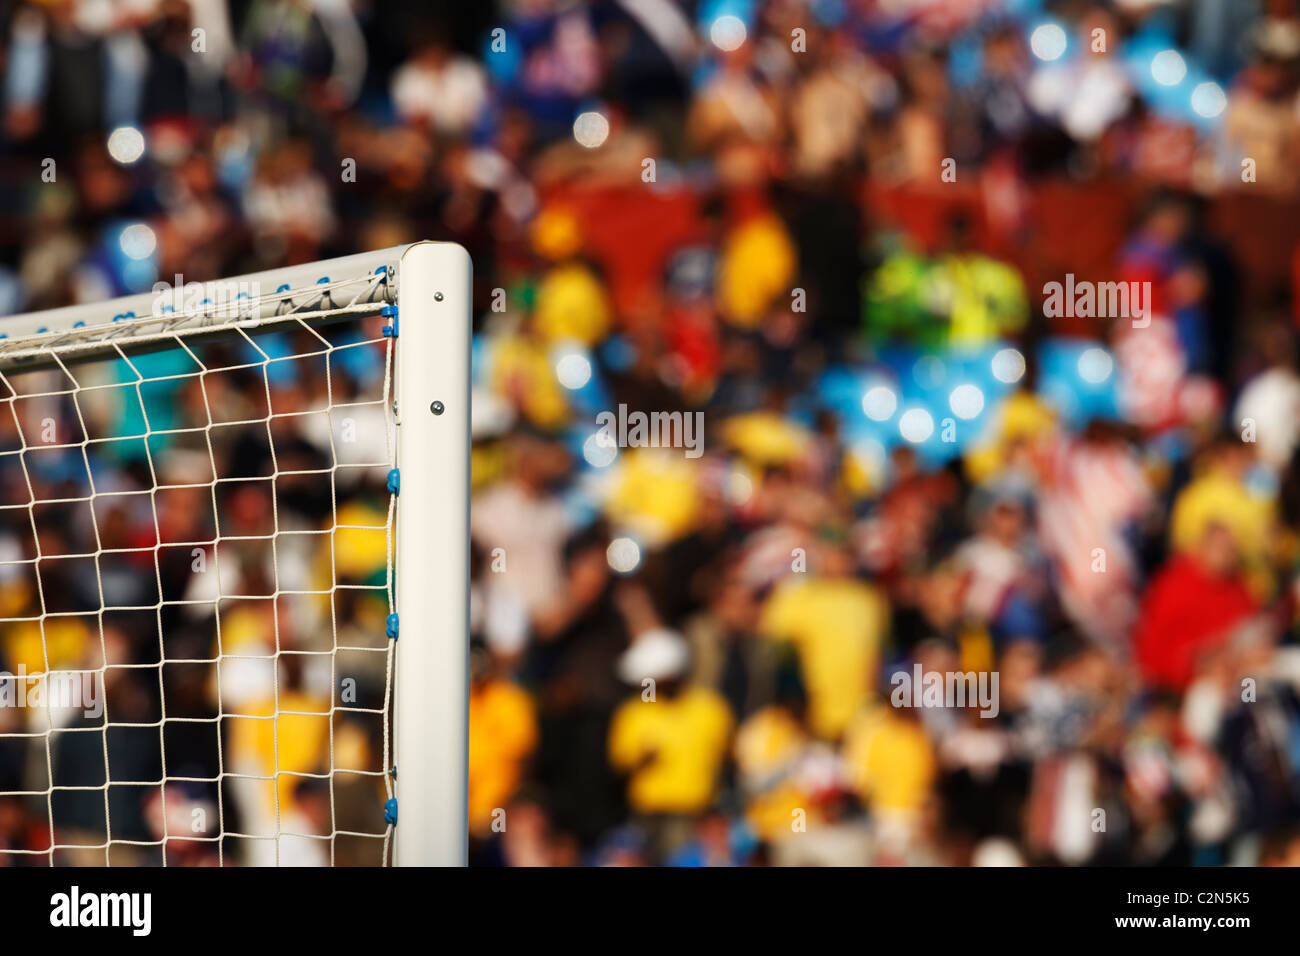 Soccer goal detail with colorful stadium background. Stock Photo